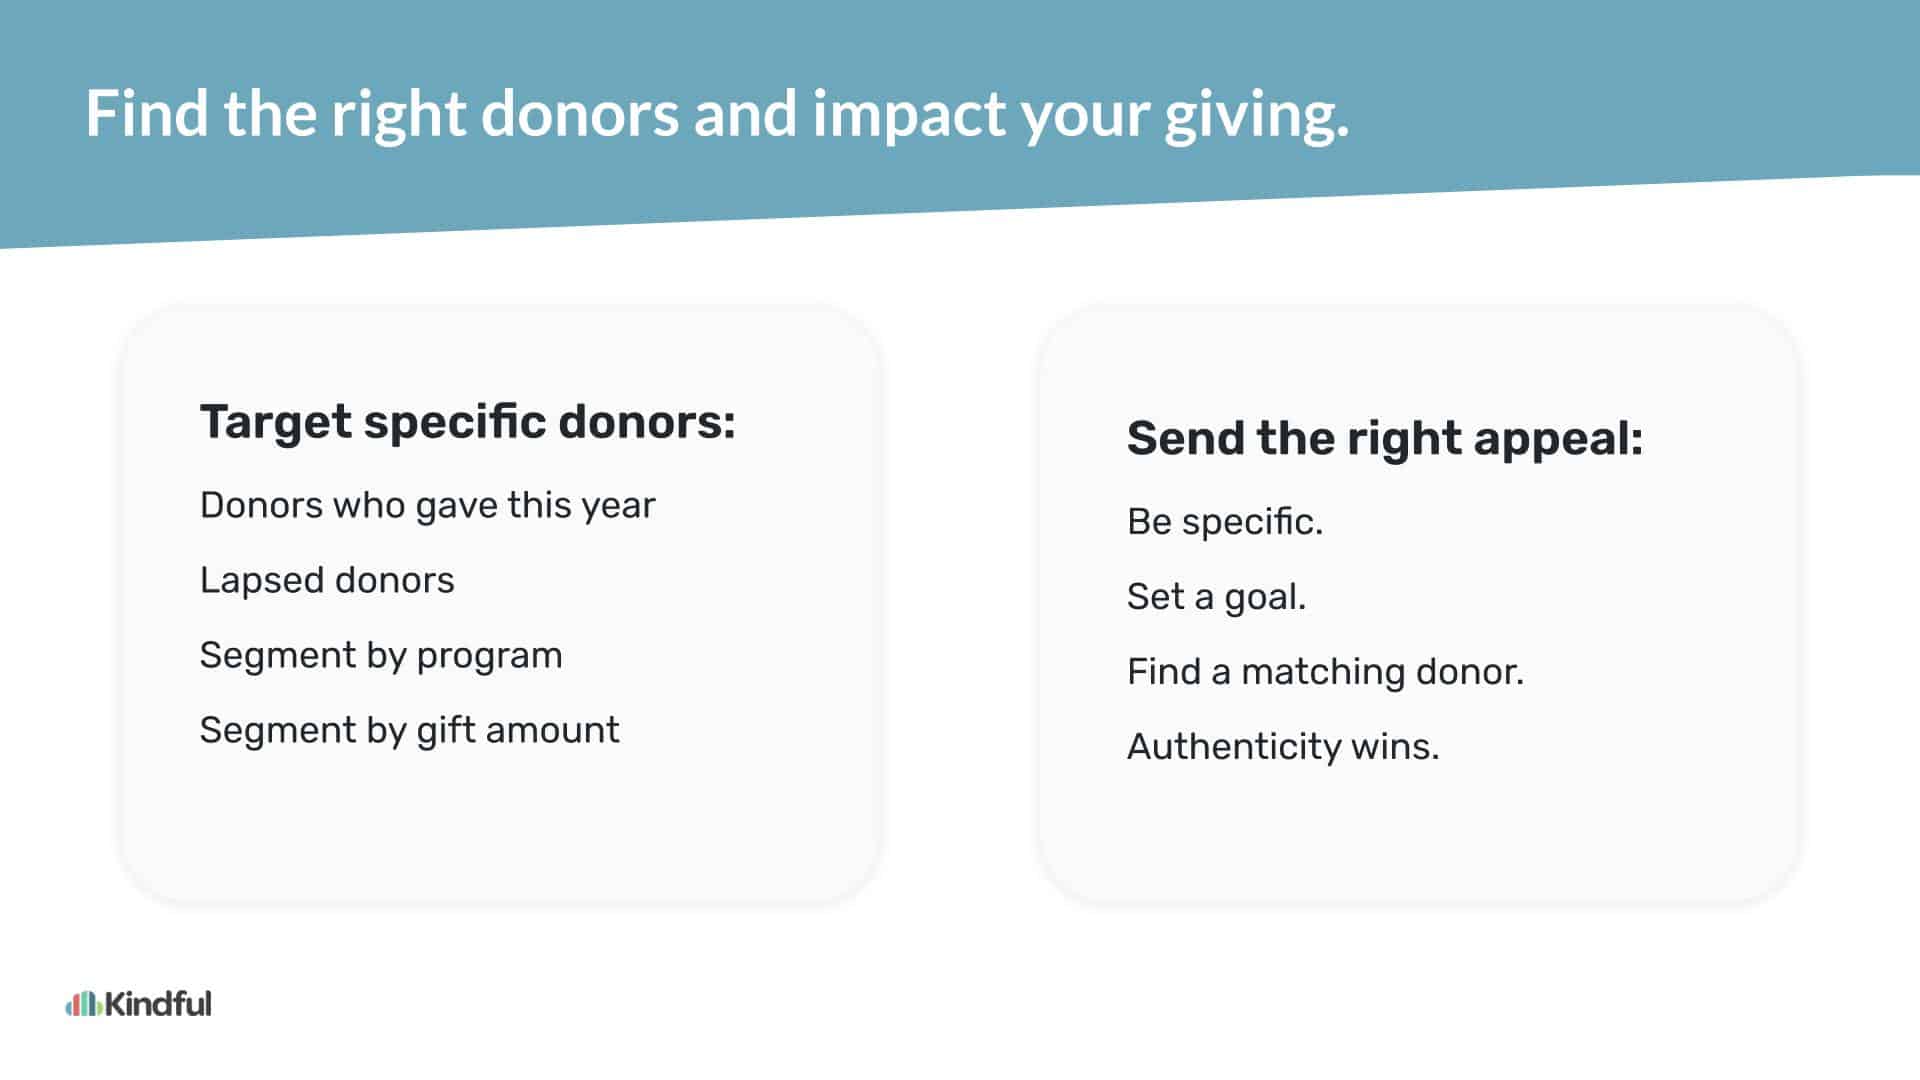 Slide 7: Find the right donors and impact your giving